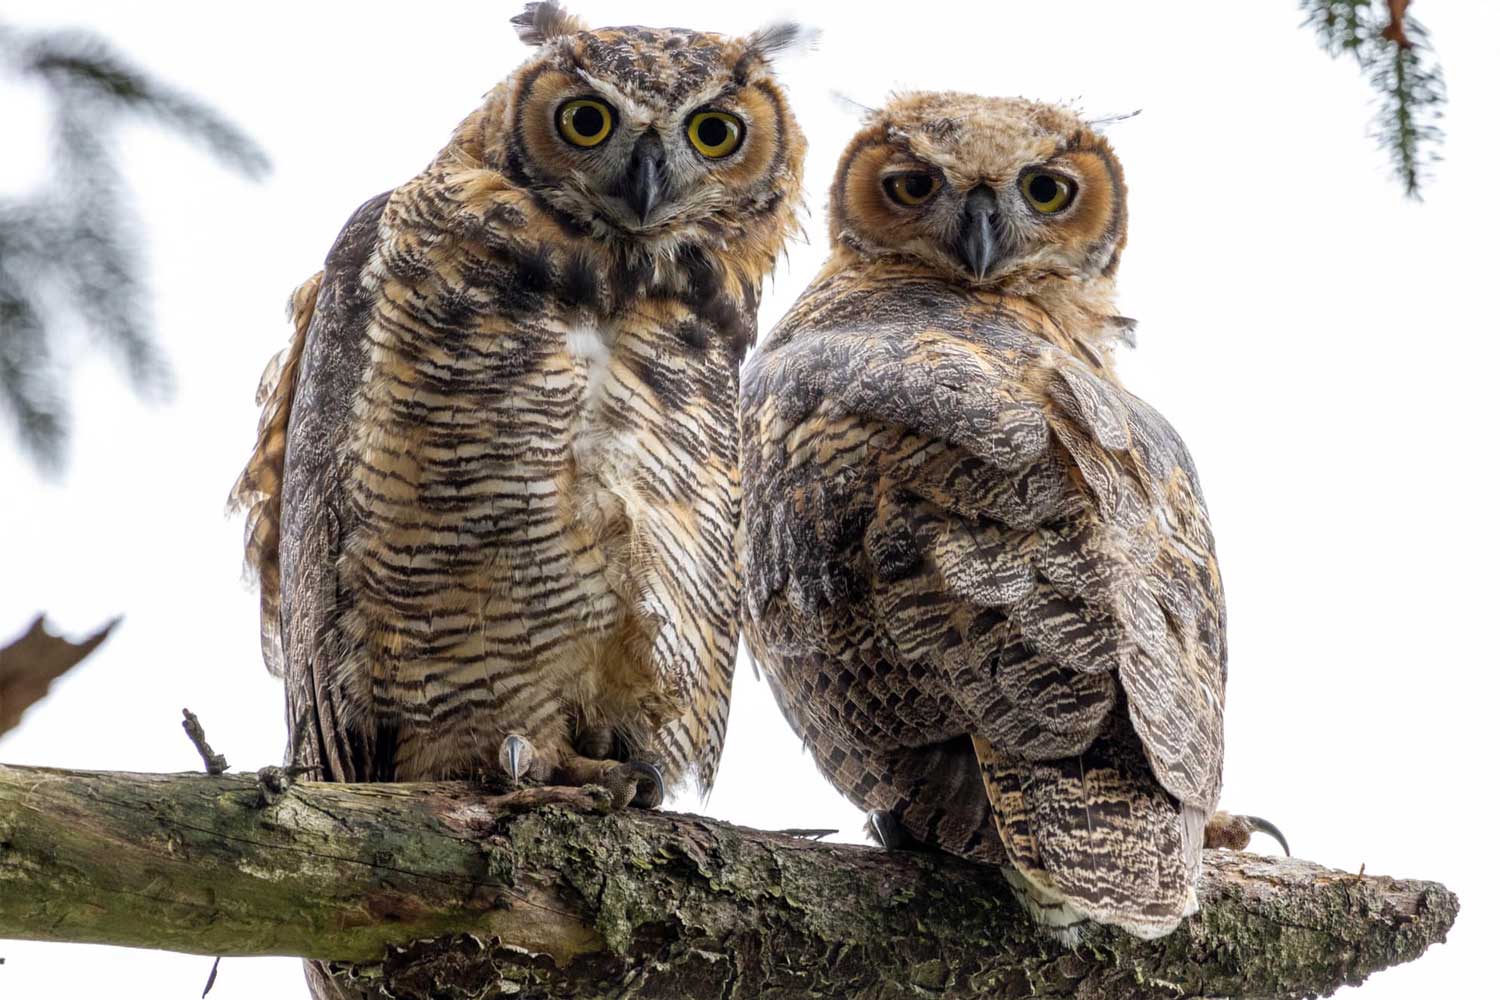 Two great horned owls perched on a branch.